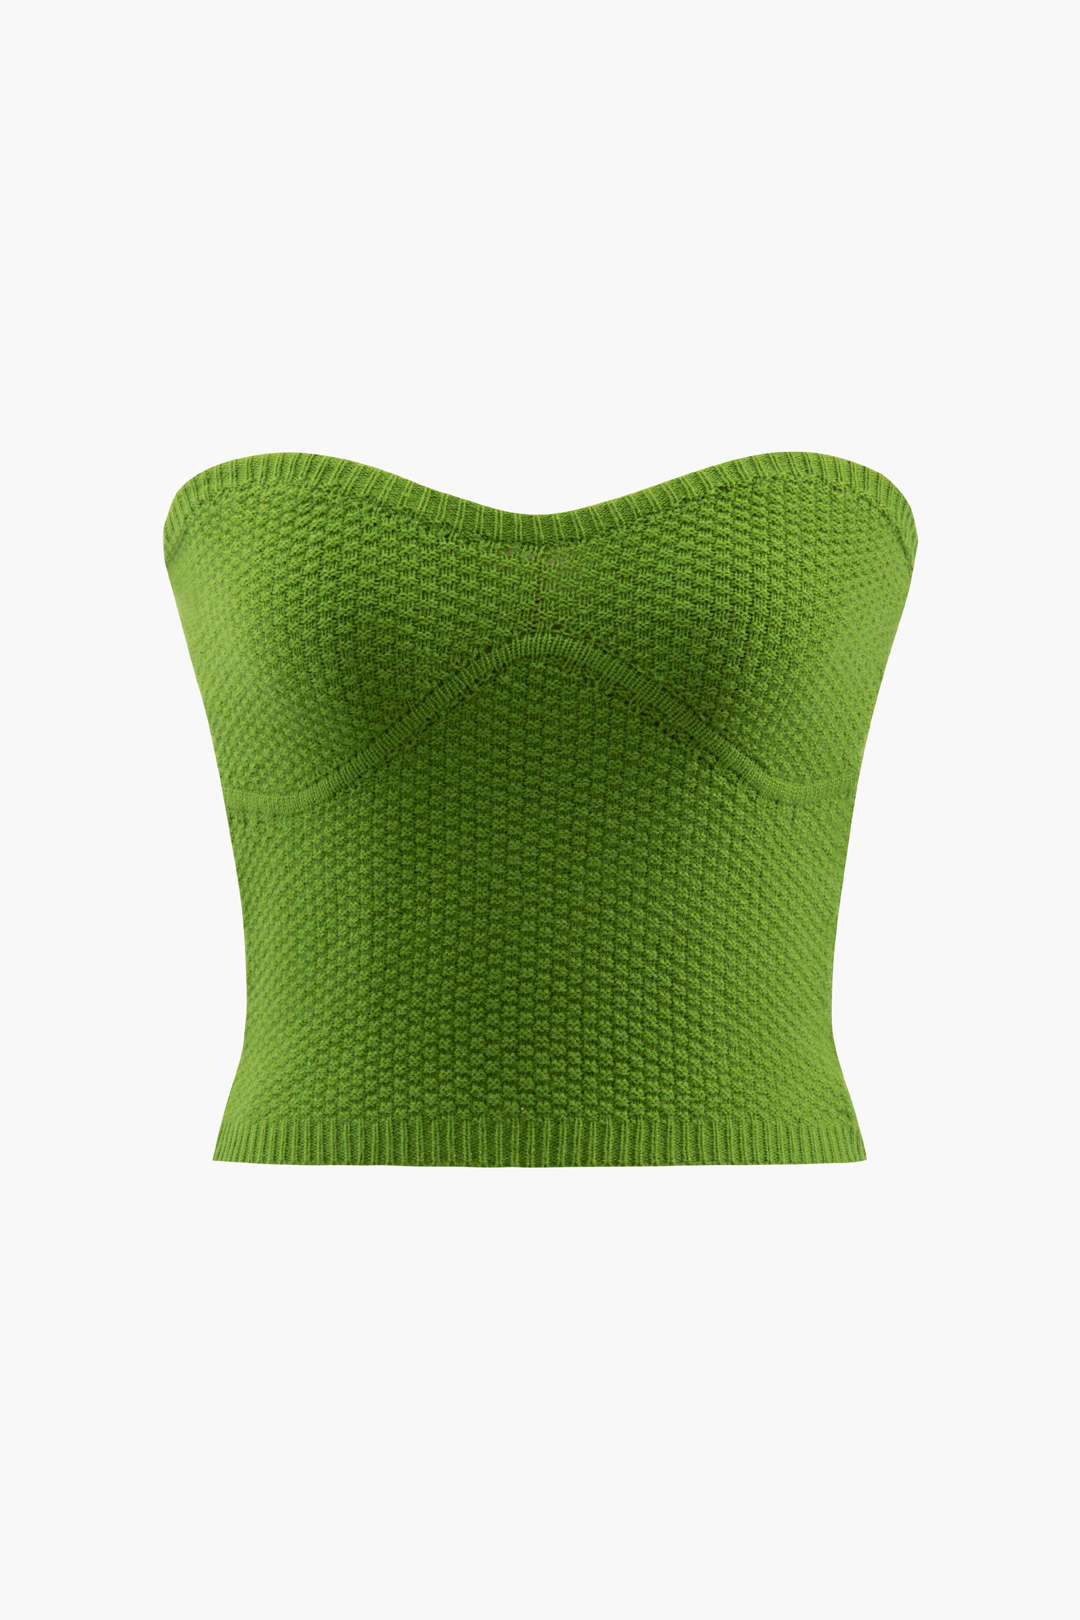 Solid Knit Tube Top